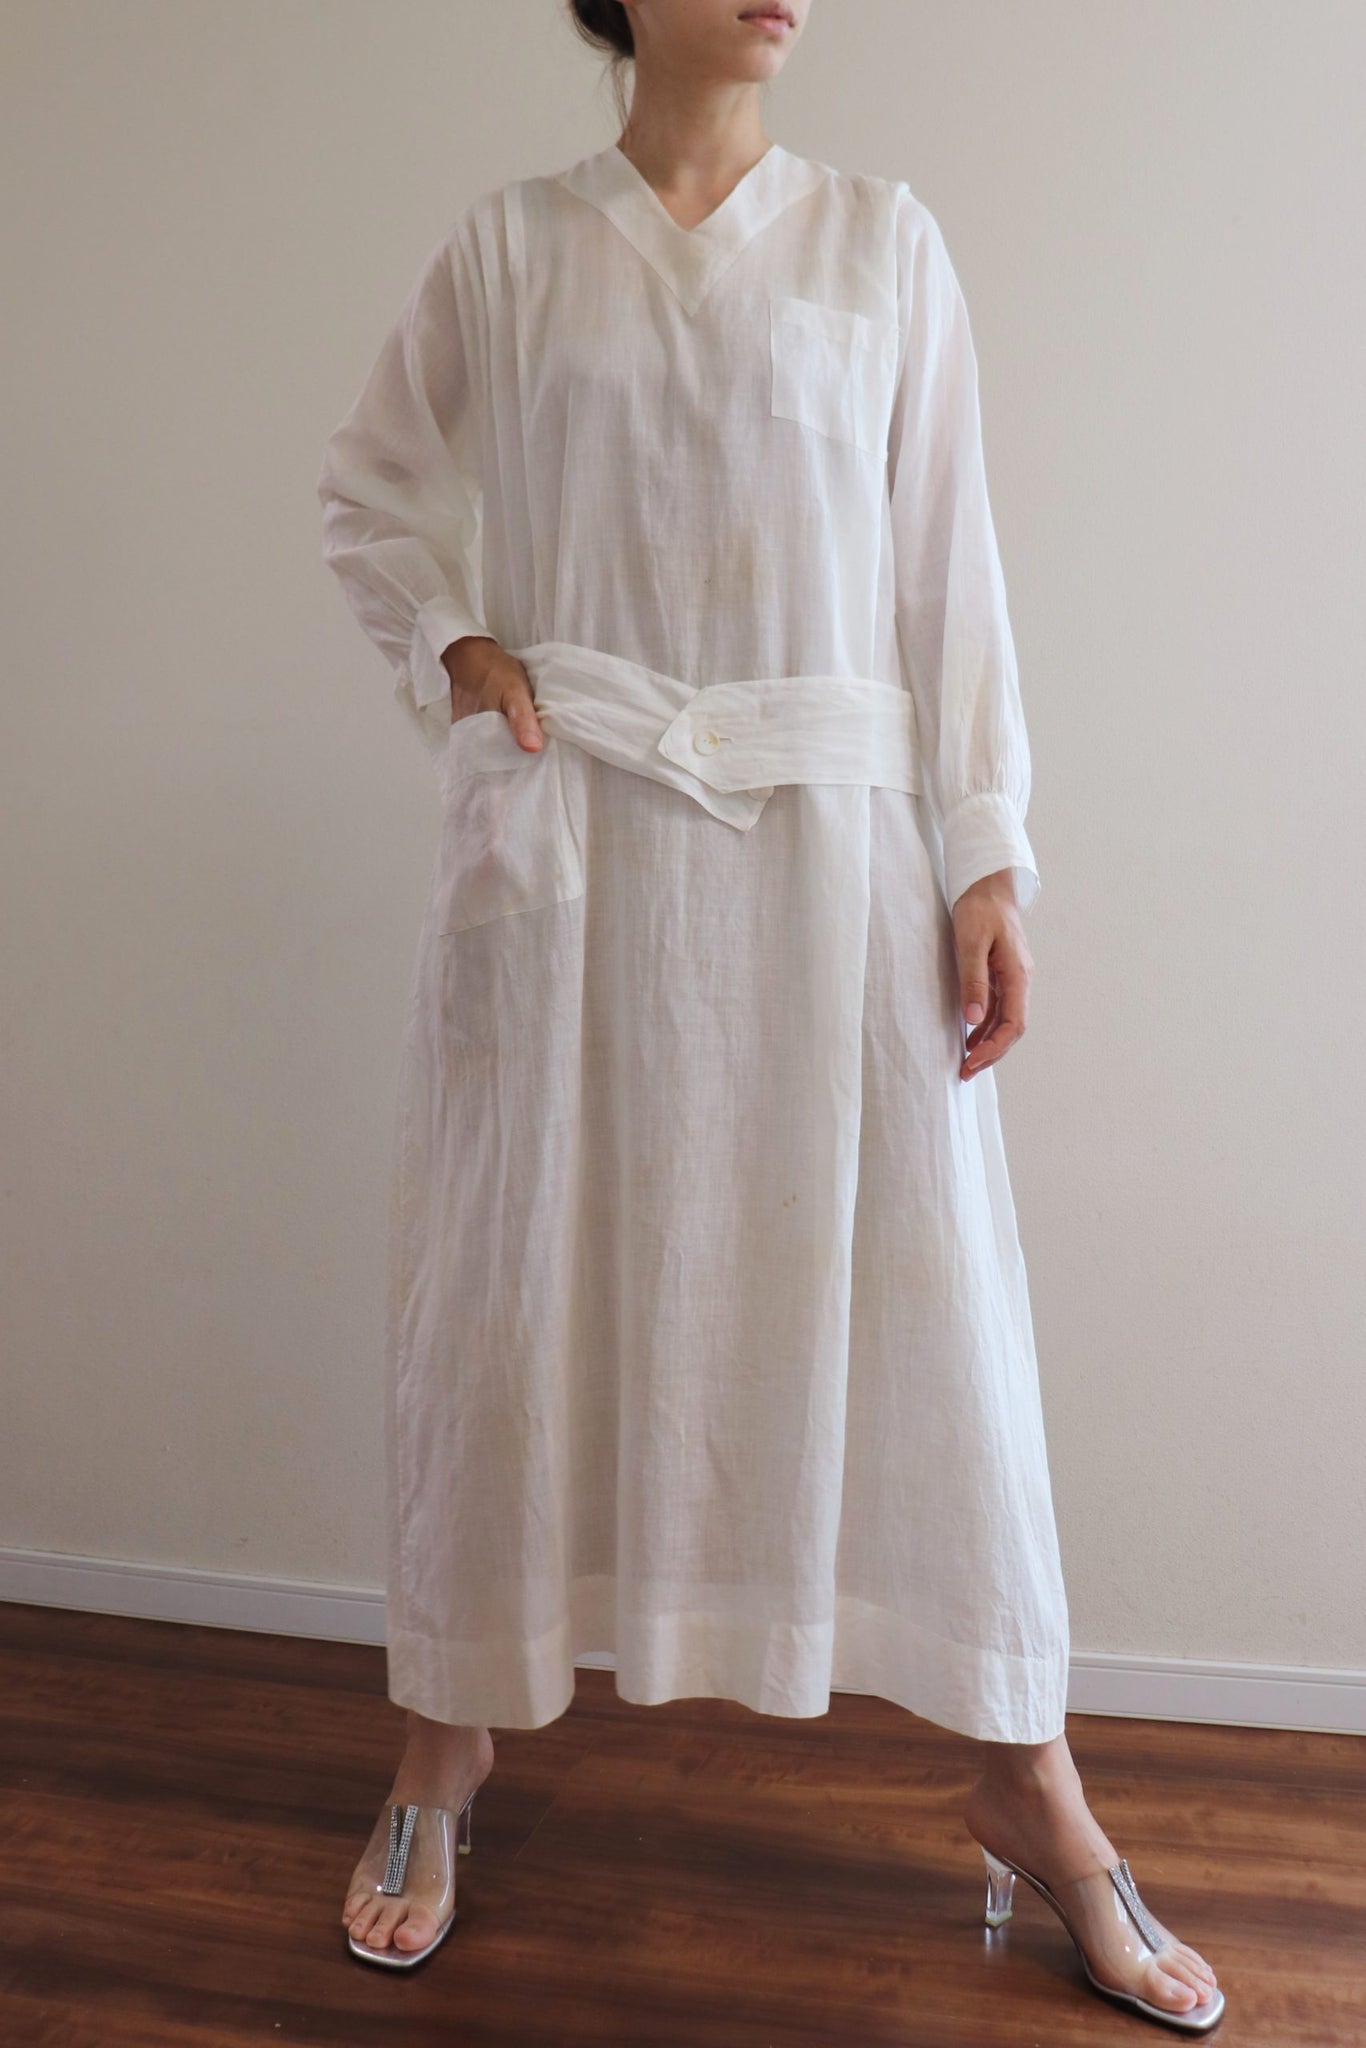 1910s Surgical Gown